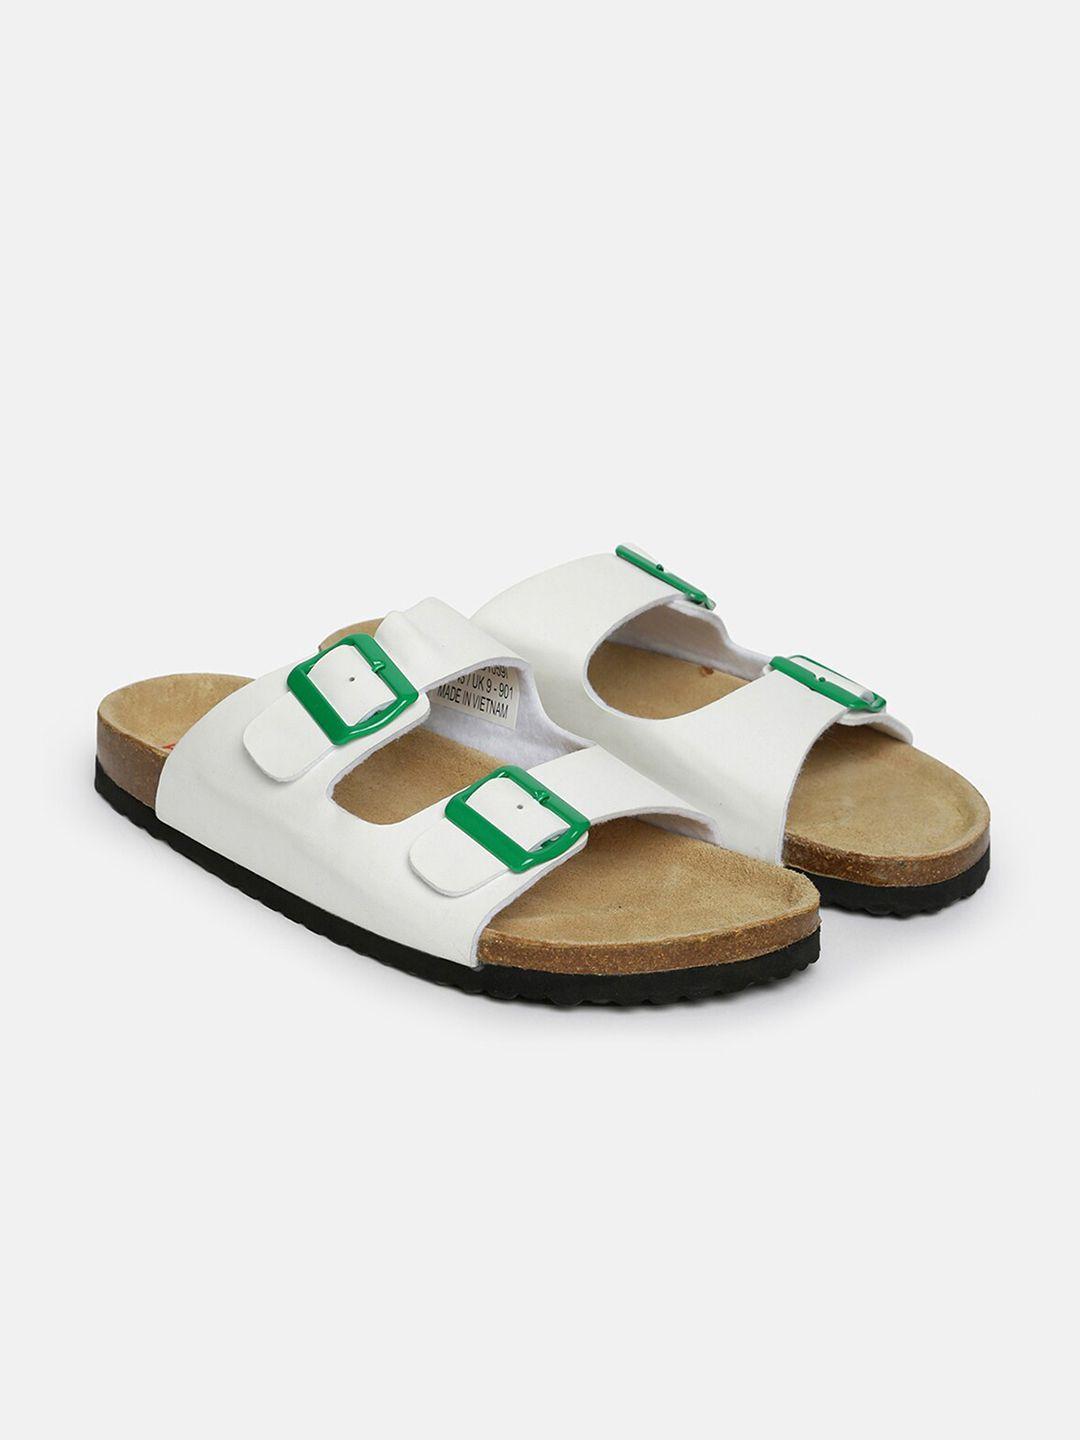 united colors of benetton men white & brown leather comfort sandals